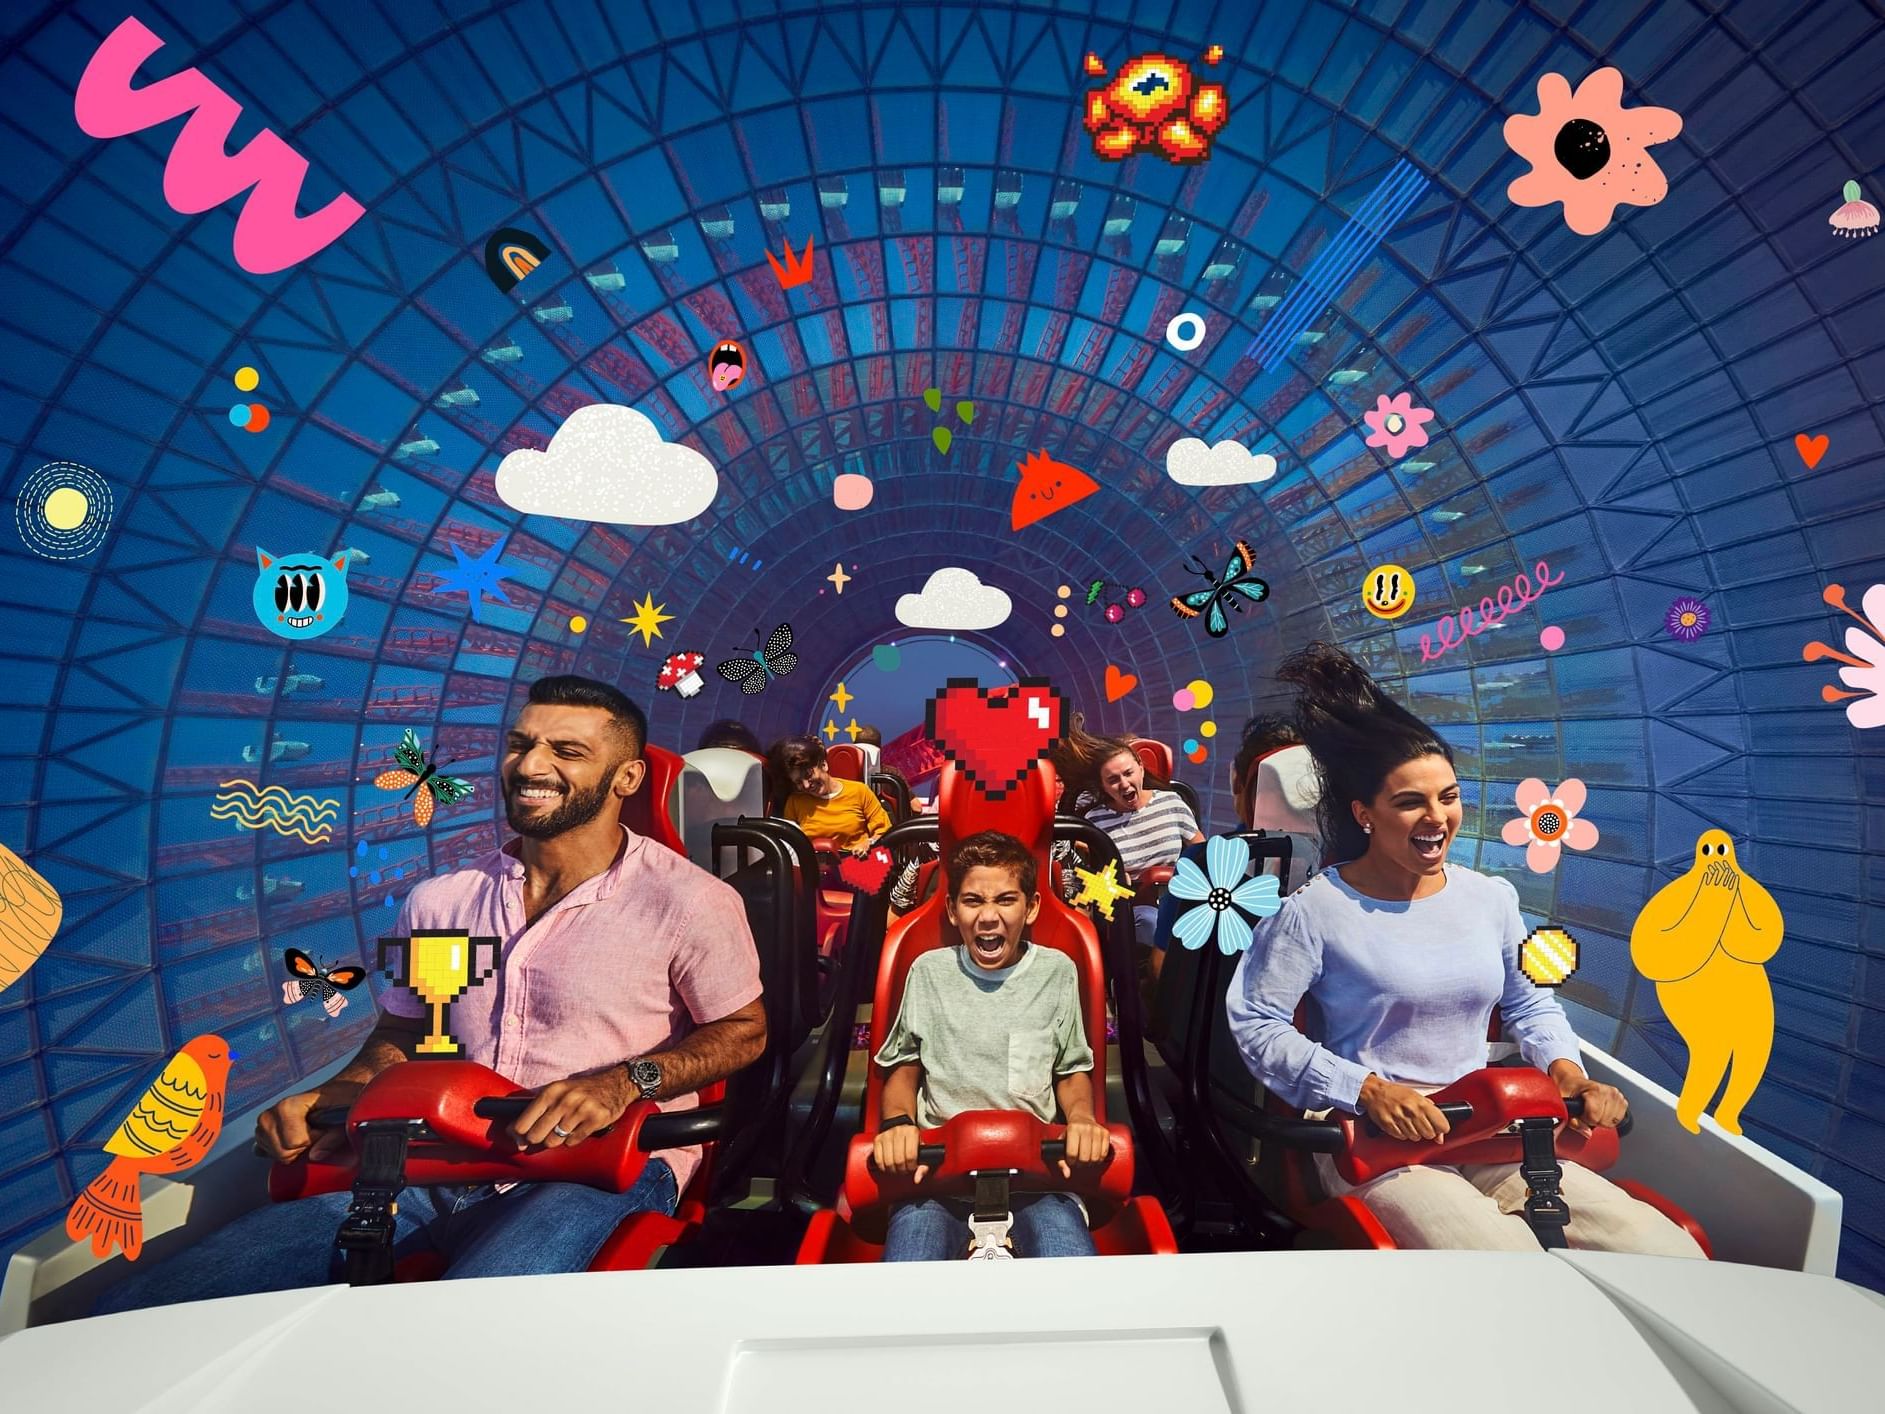 Animated image of a family on a rollercoaster at Al Hamra 